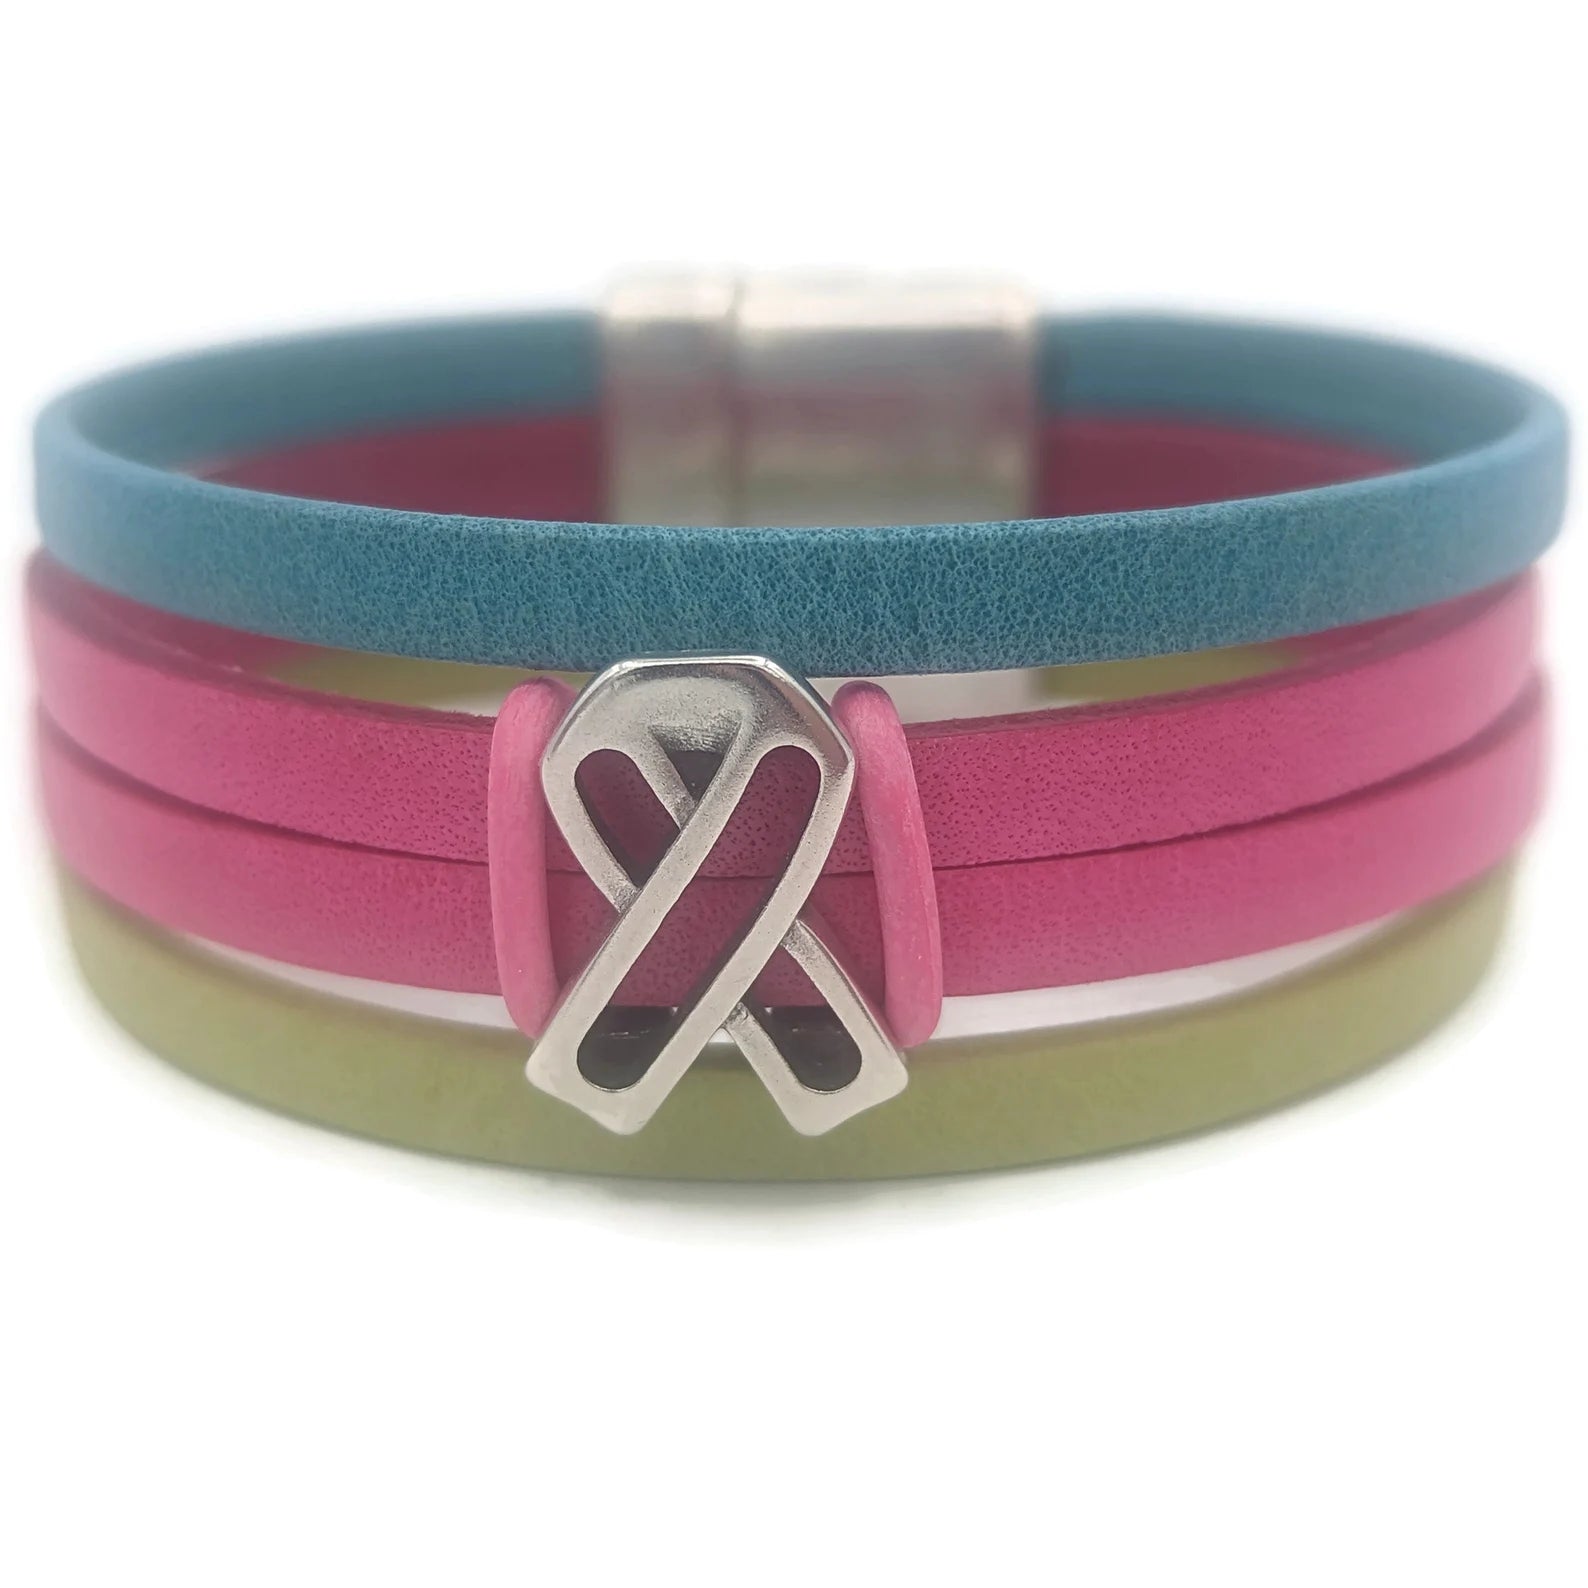 Buy 20 Pieces Breast Cancer Awareness Silicone Wristband Pink Ribbon  Bracelets and 20 Pieces Breast Cancer Awareness Lapel Pins Pink Ribbon Pins  Ribbon Lapel Pins for Women Party Favors Online at Lowest